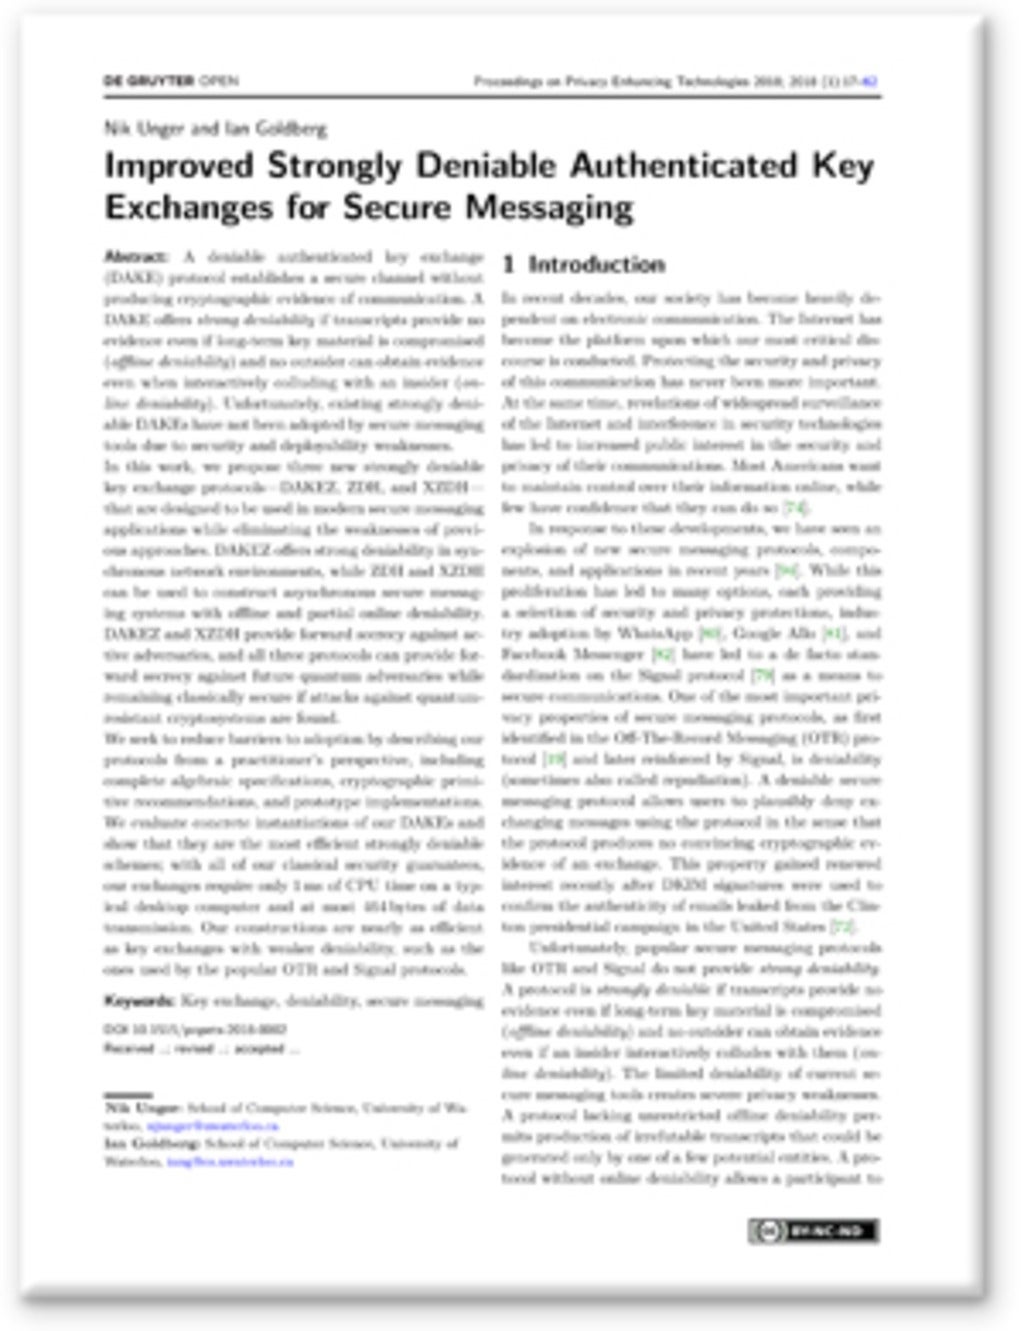 Screenshot of the paper: Improved Strongly Deniable Authenticated Key Exchanges for Secure Messaging